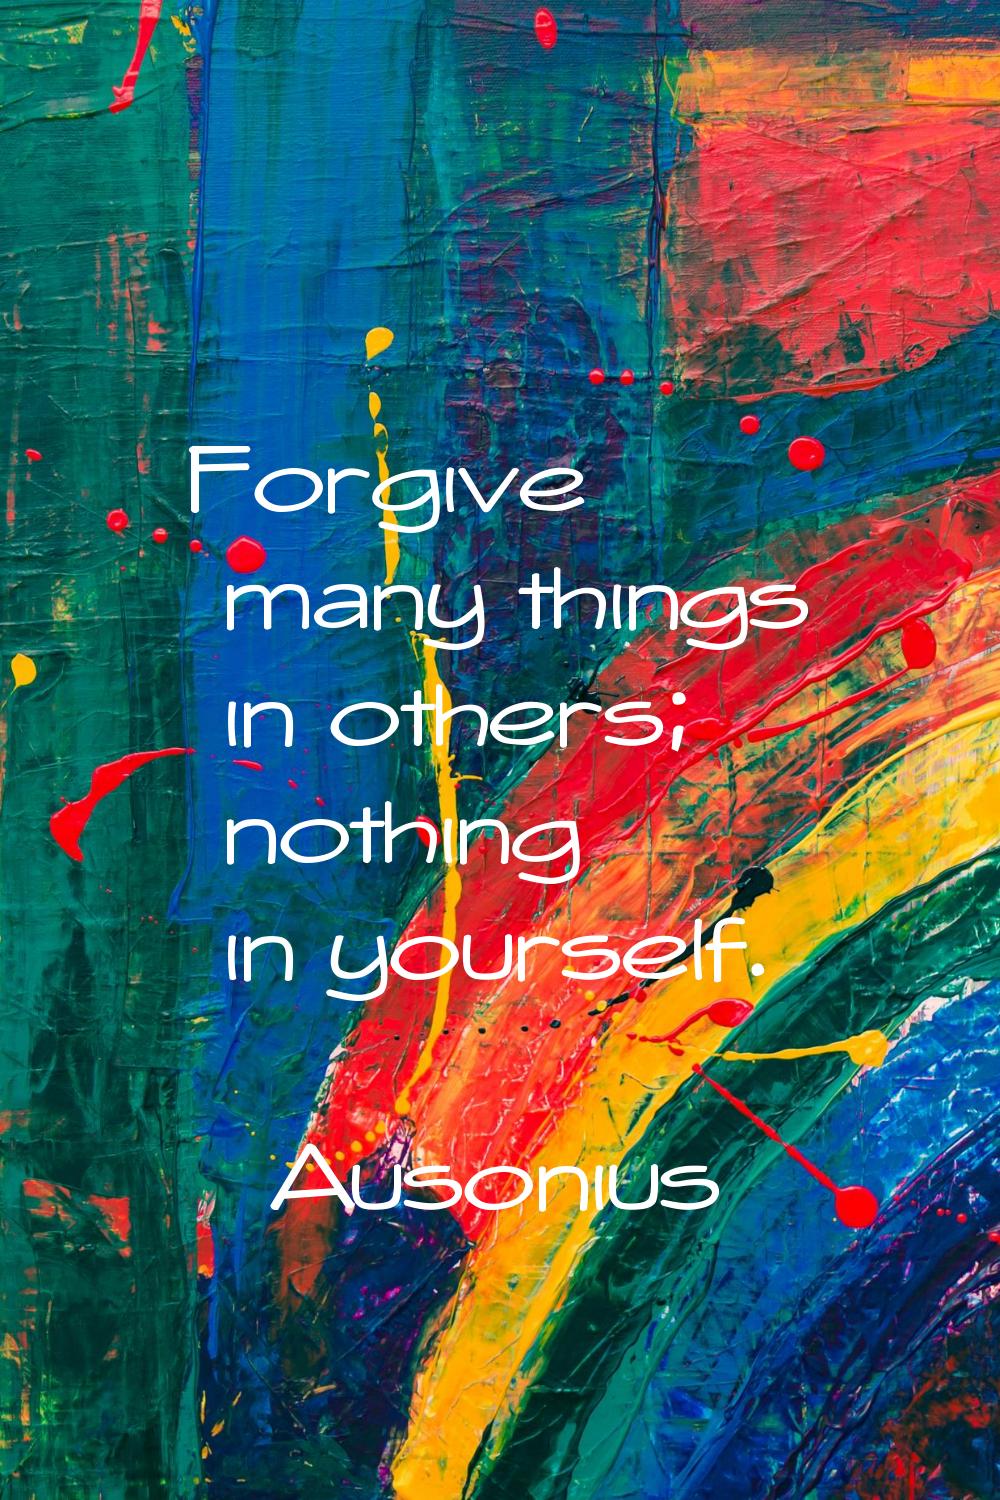 Forgive many things in others; nothing in yourself.